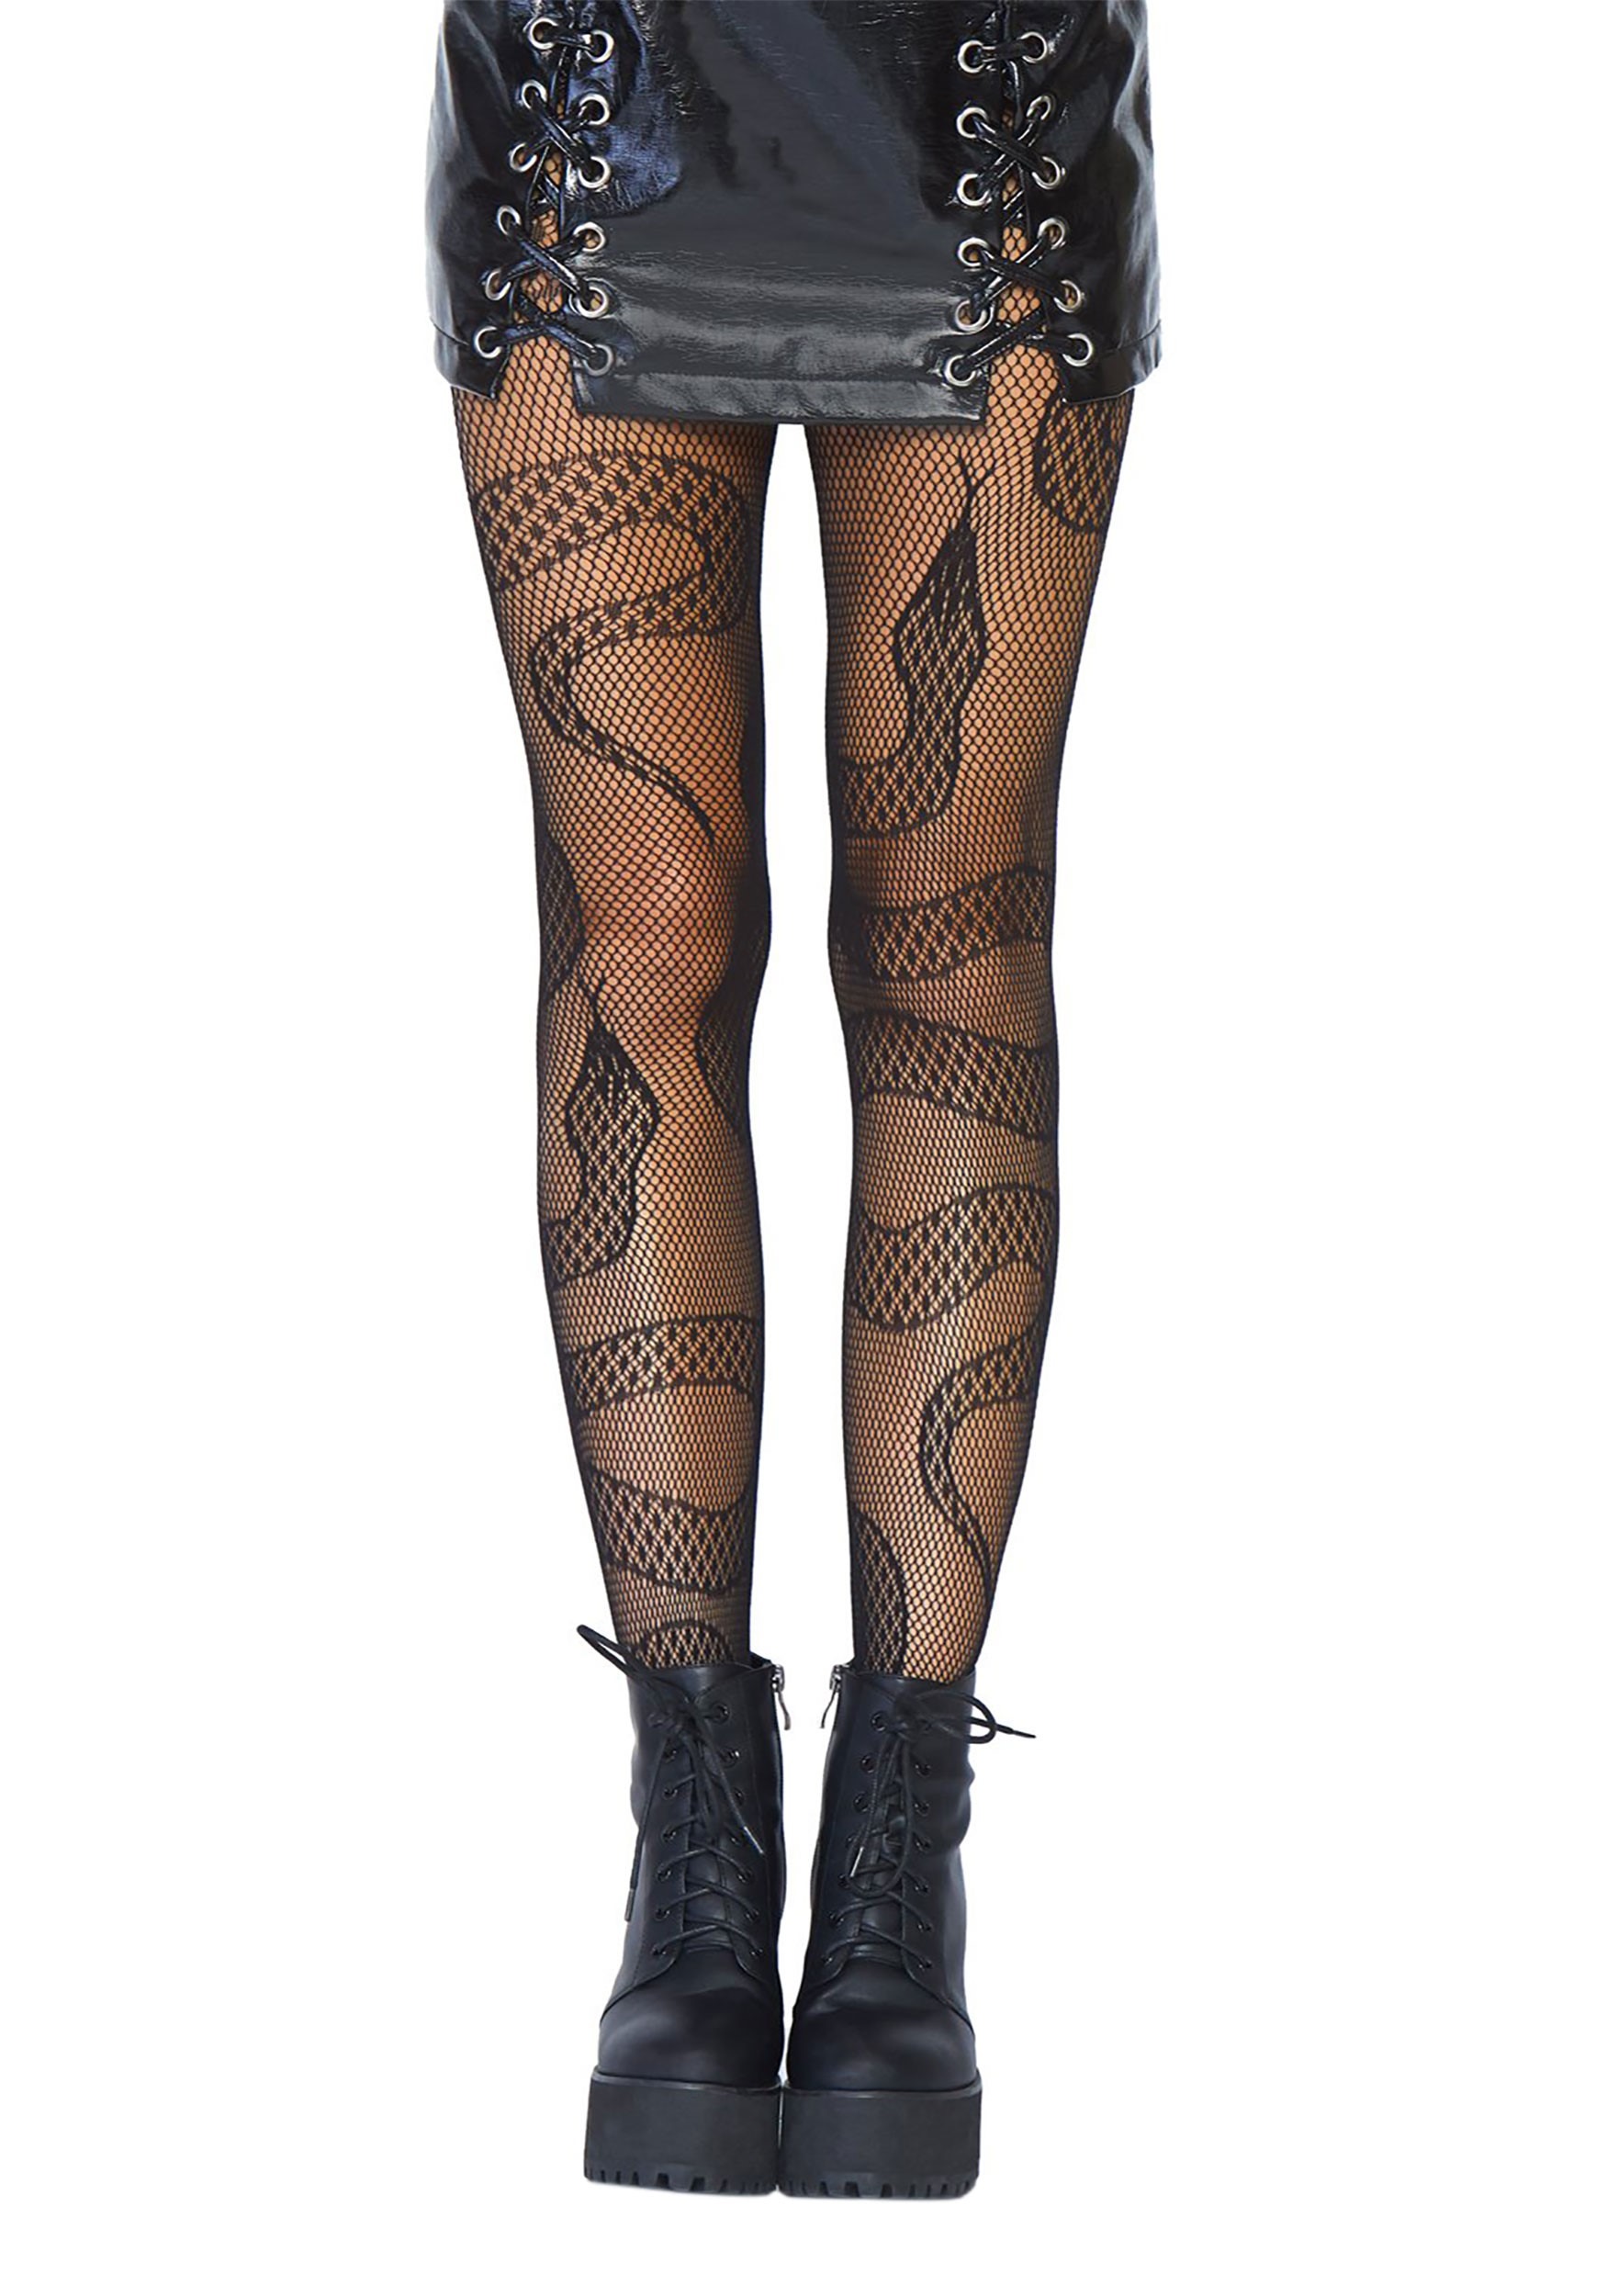 https://images.fun.com/products/58025/1-1/womens-snake-net-tights.jpg